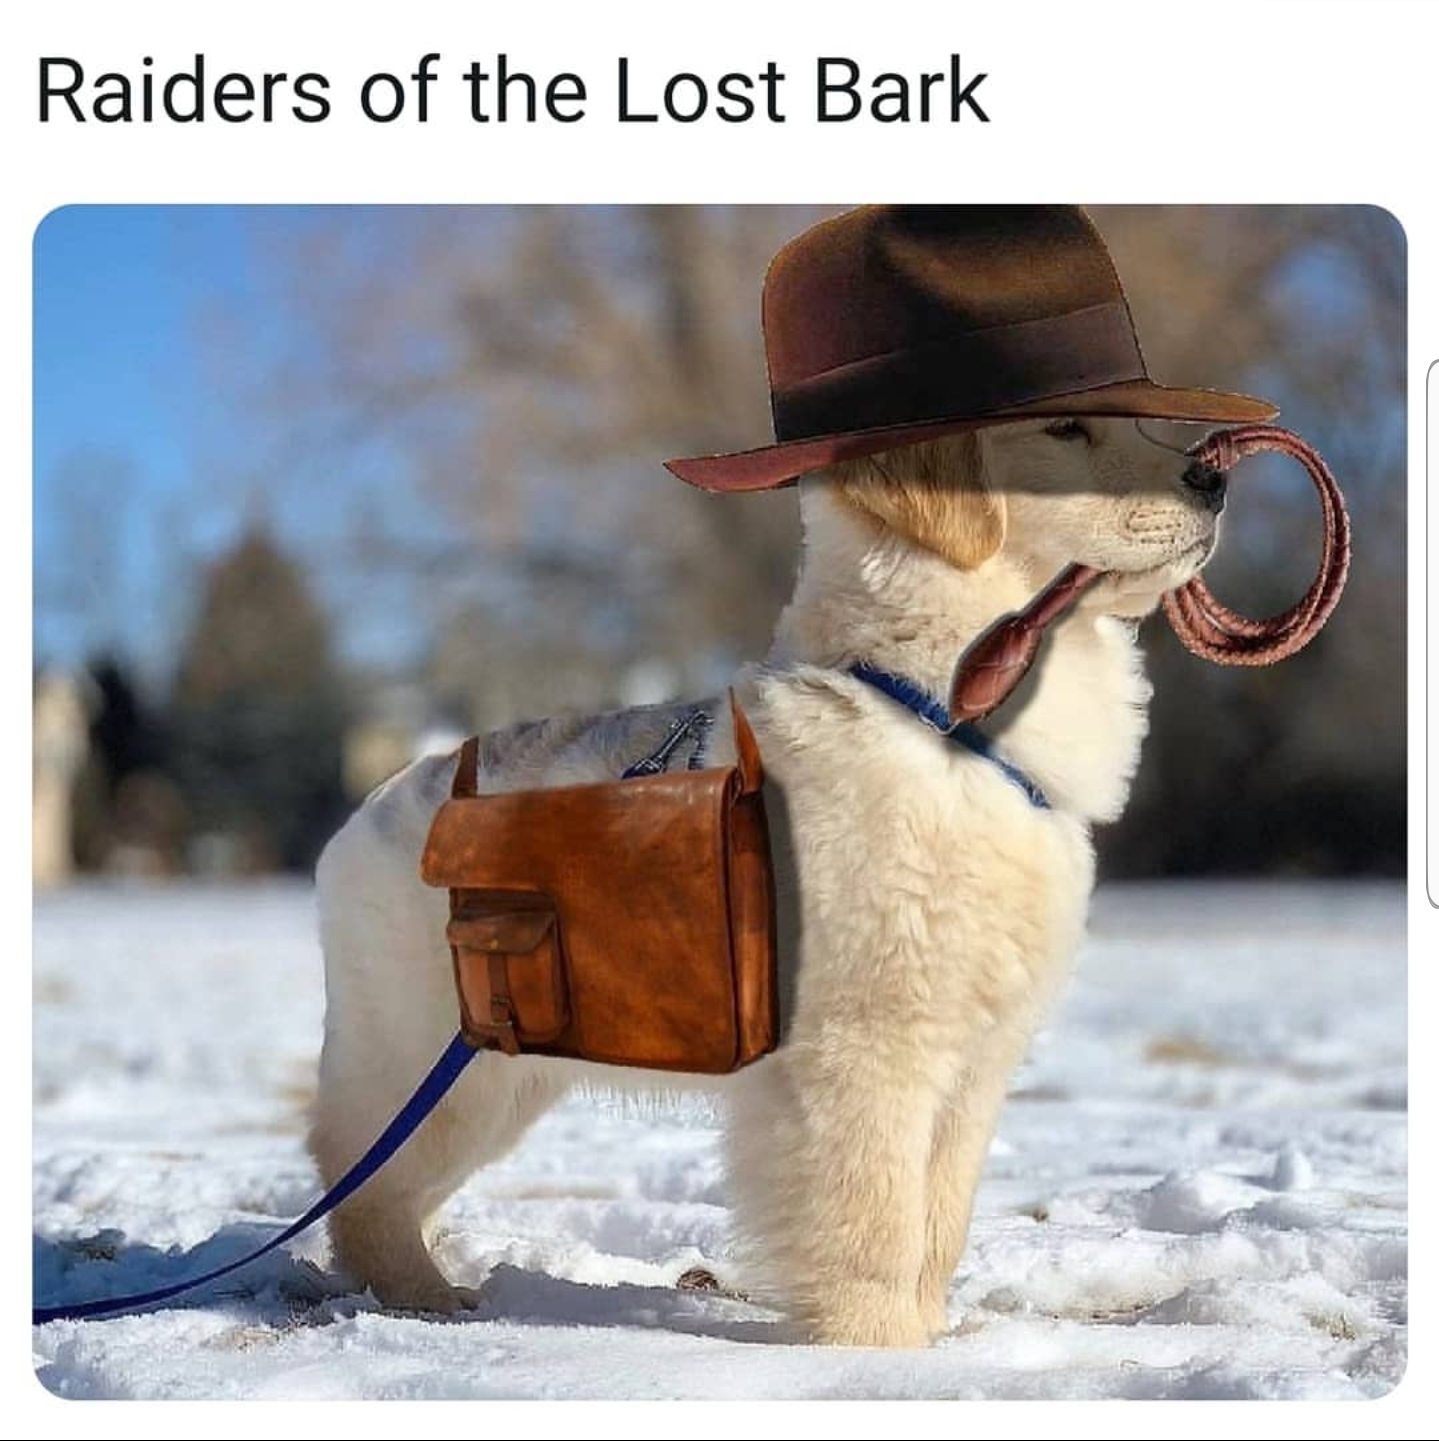 wholesome memes - Raiders of the Lost Bark